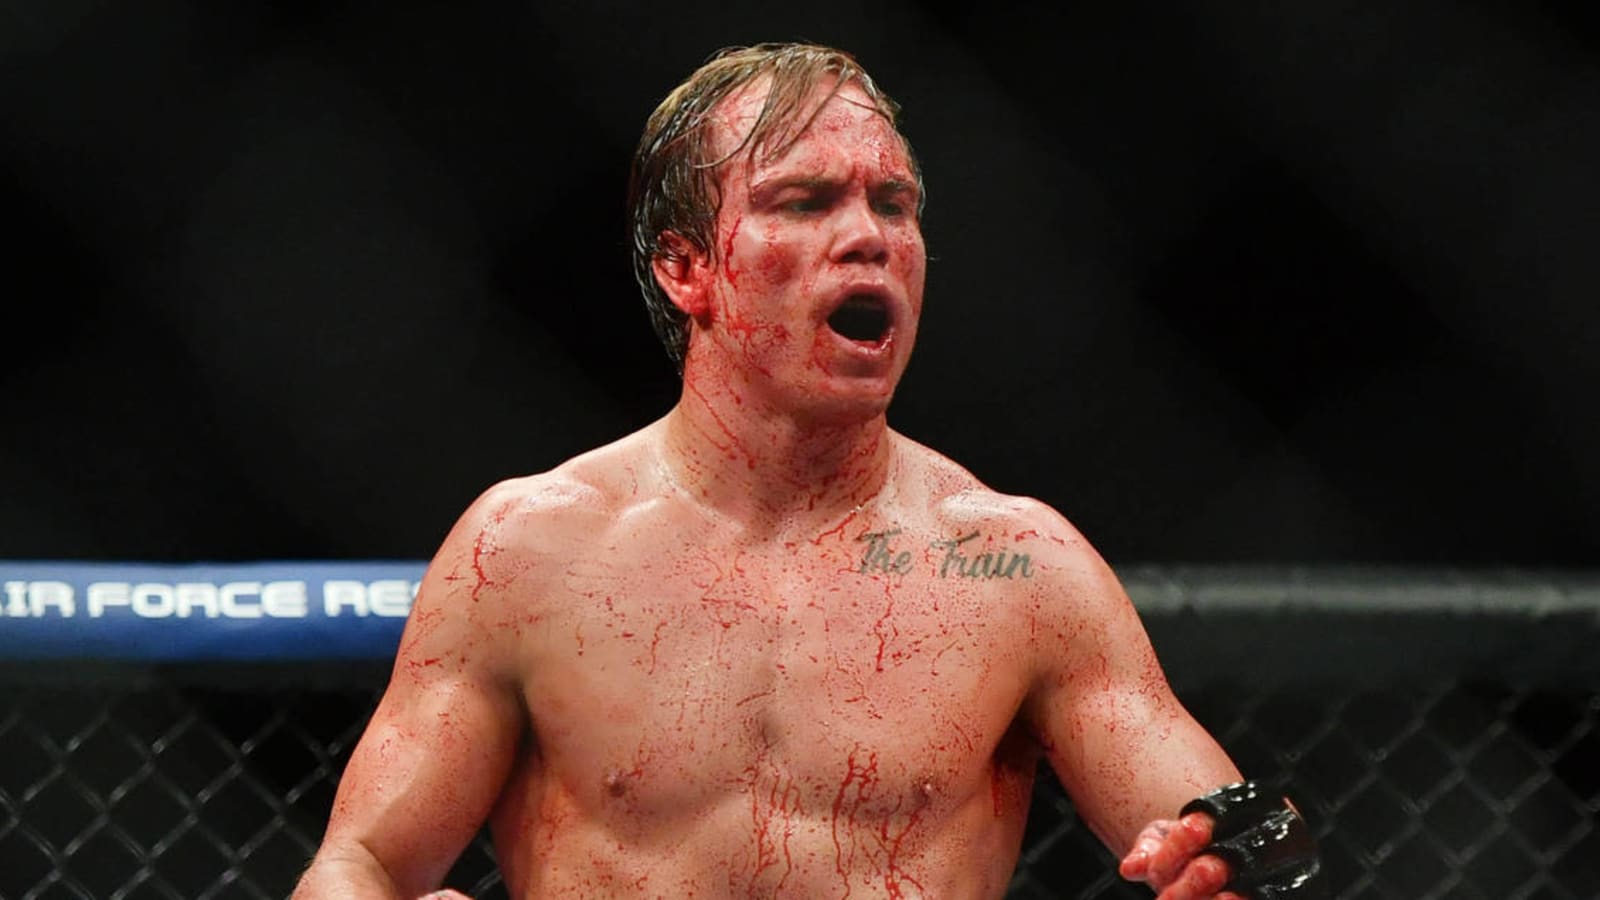 Nate Landwehr says Darren Elkins’ blood was in his mouth during fight